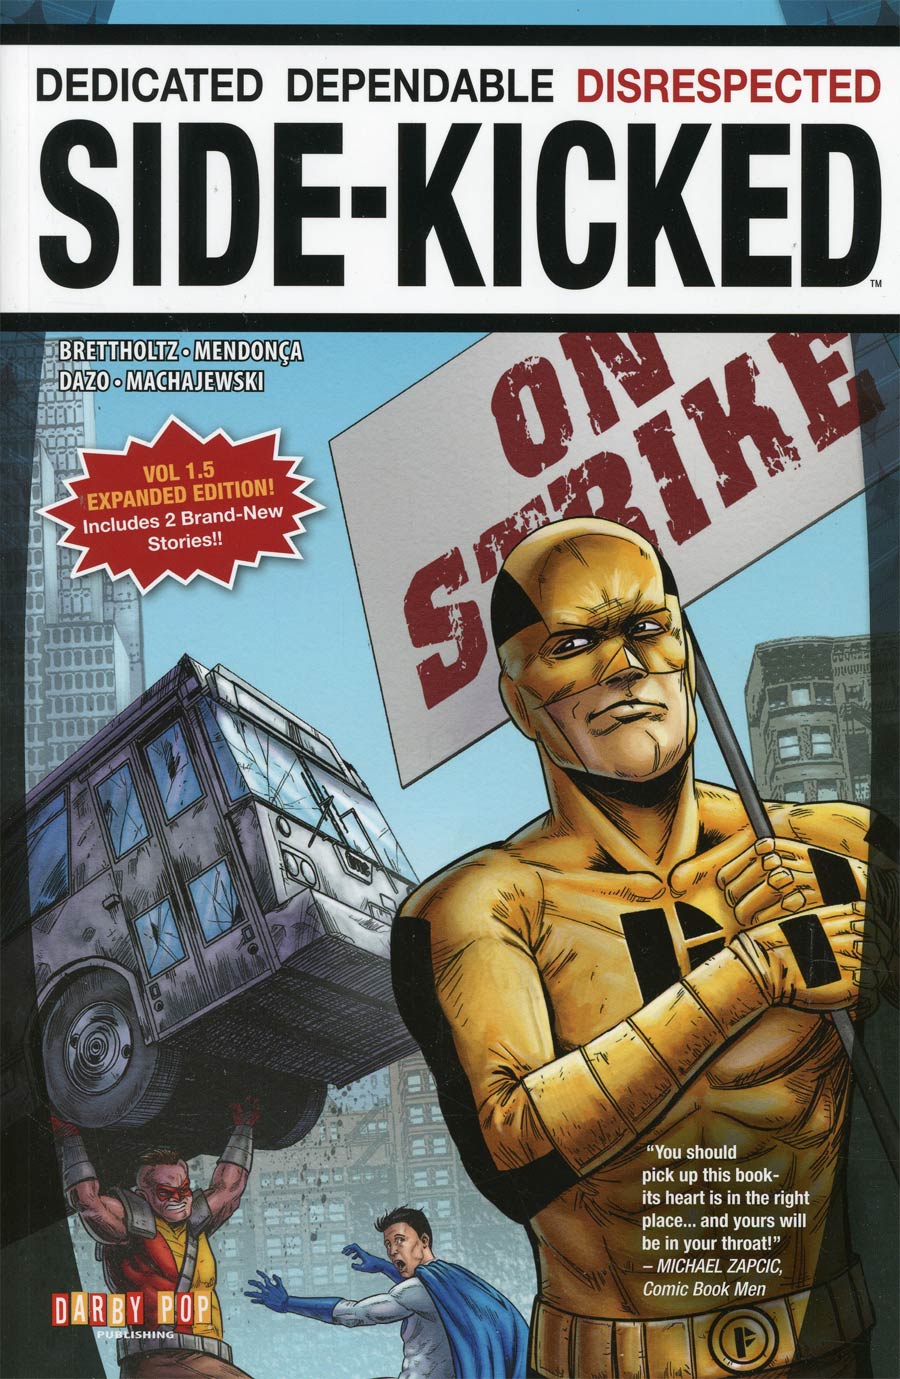 Side-Kicked Vol 1.5 Expanded Edition TP